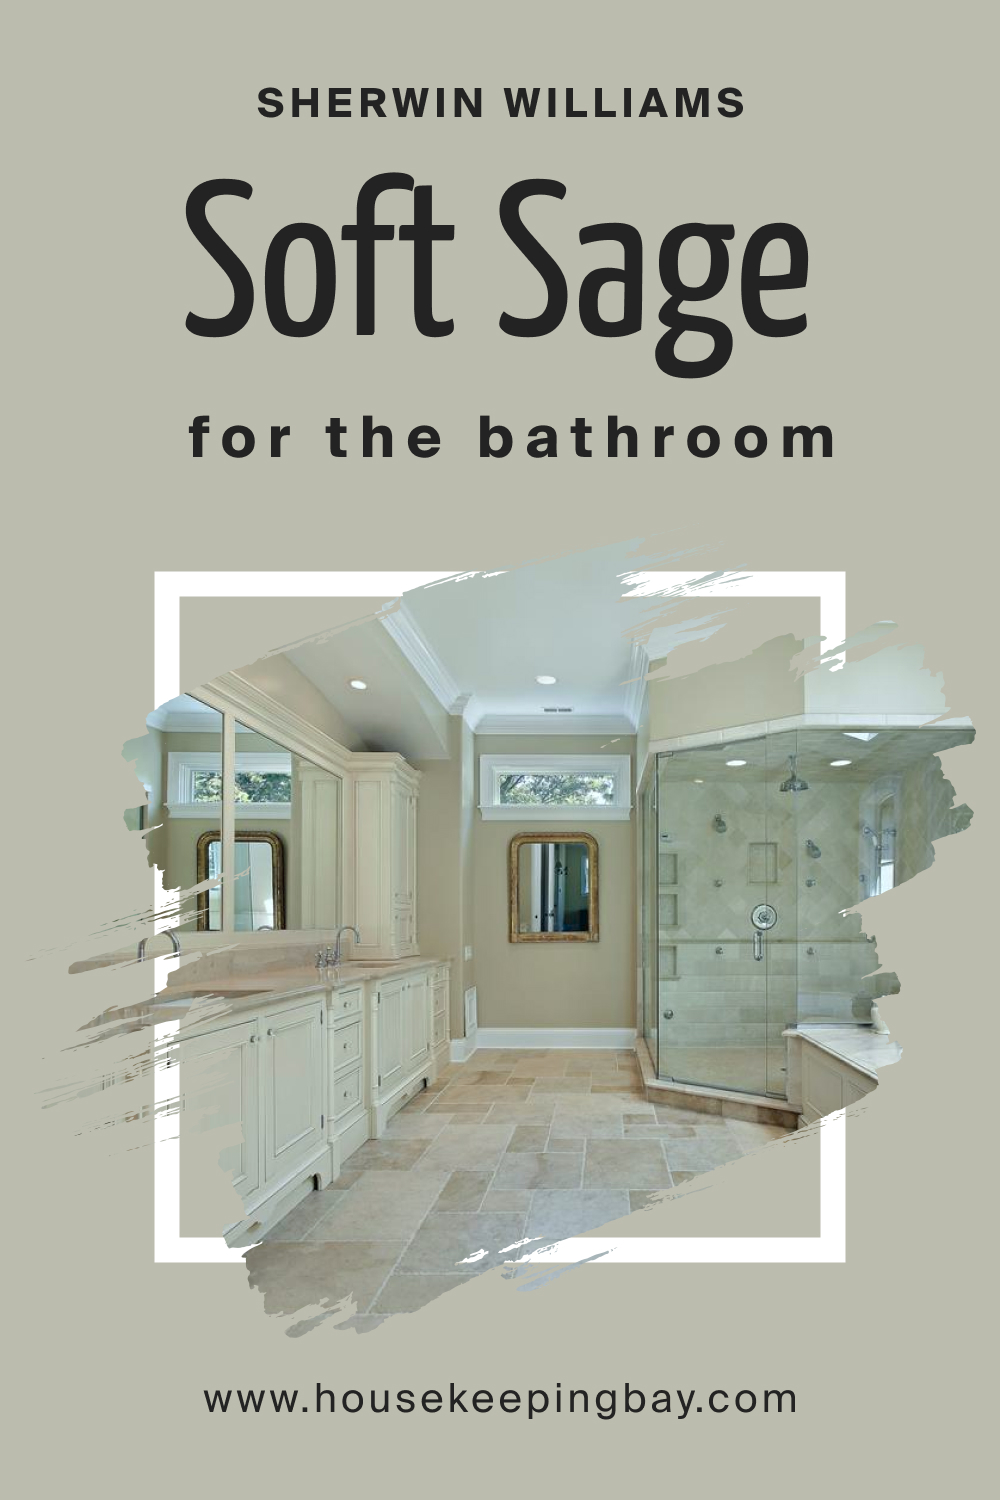 Sherwin Williams. SW 9647 Soft Sage For the Bathroom